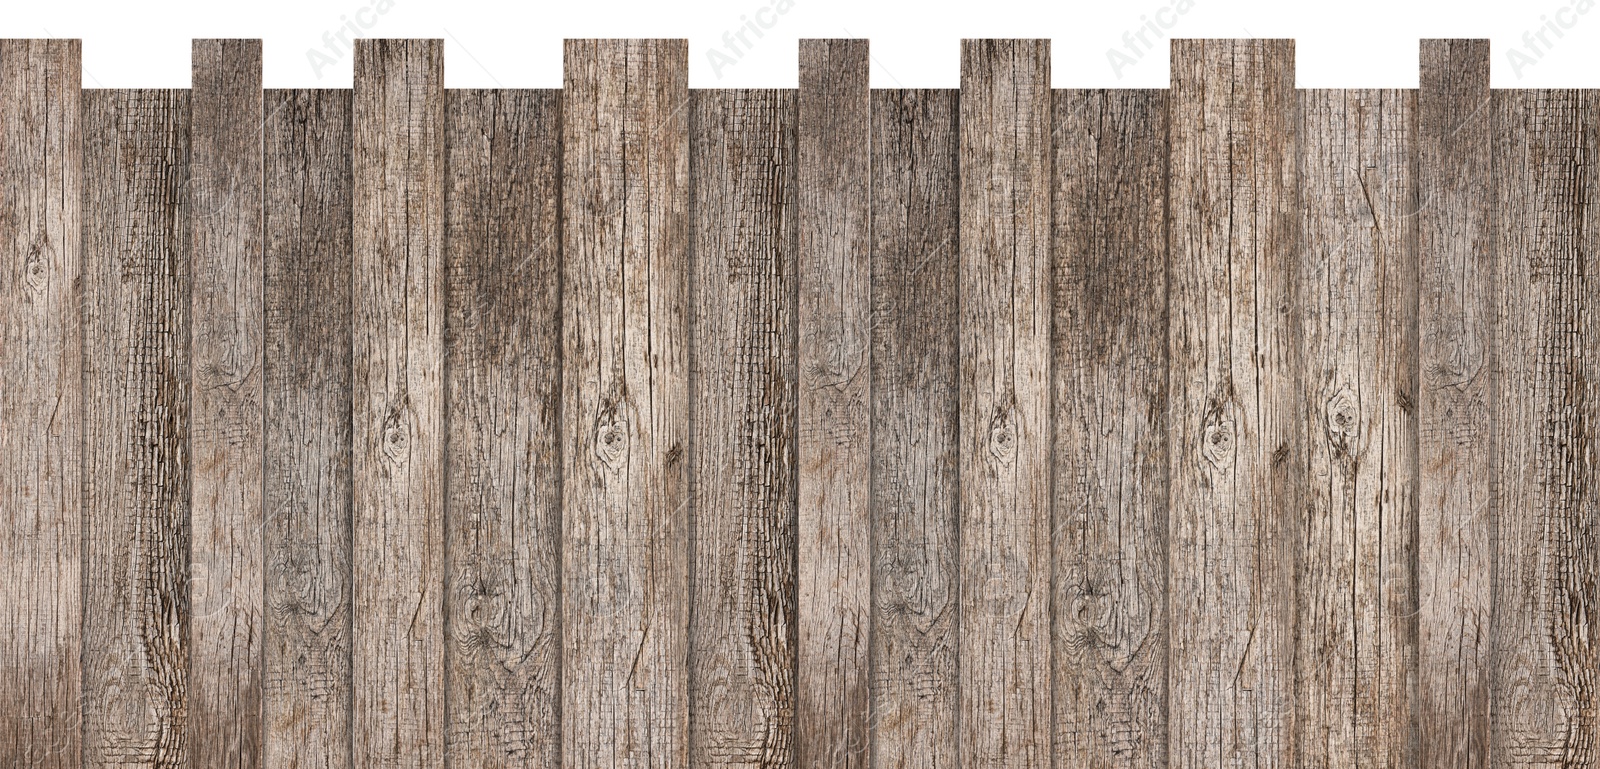 Image of Fence made of wooden planks isolated on white